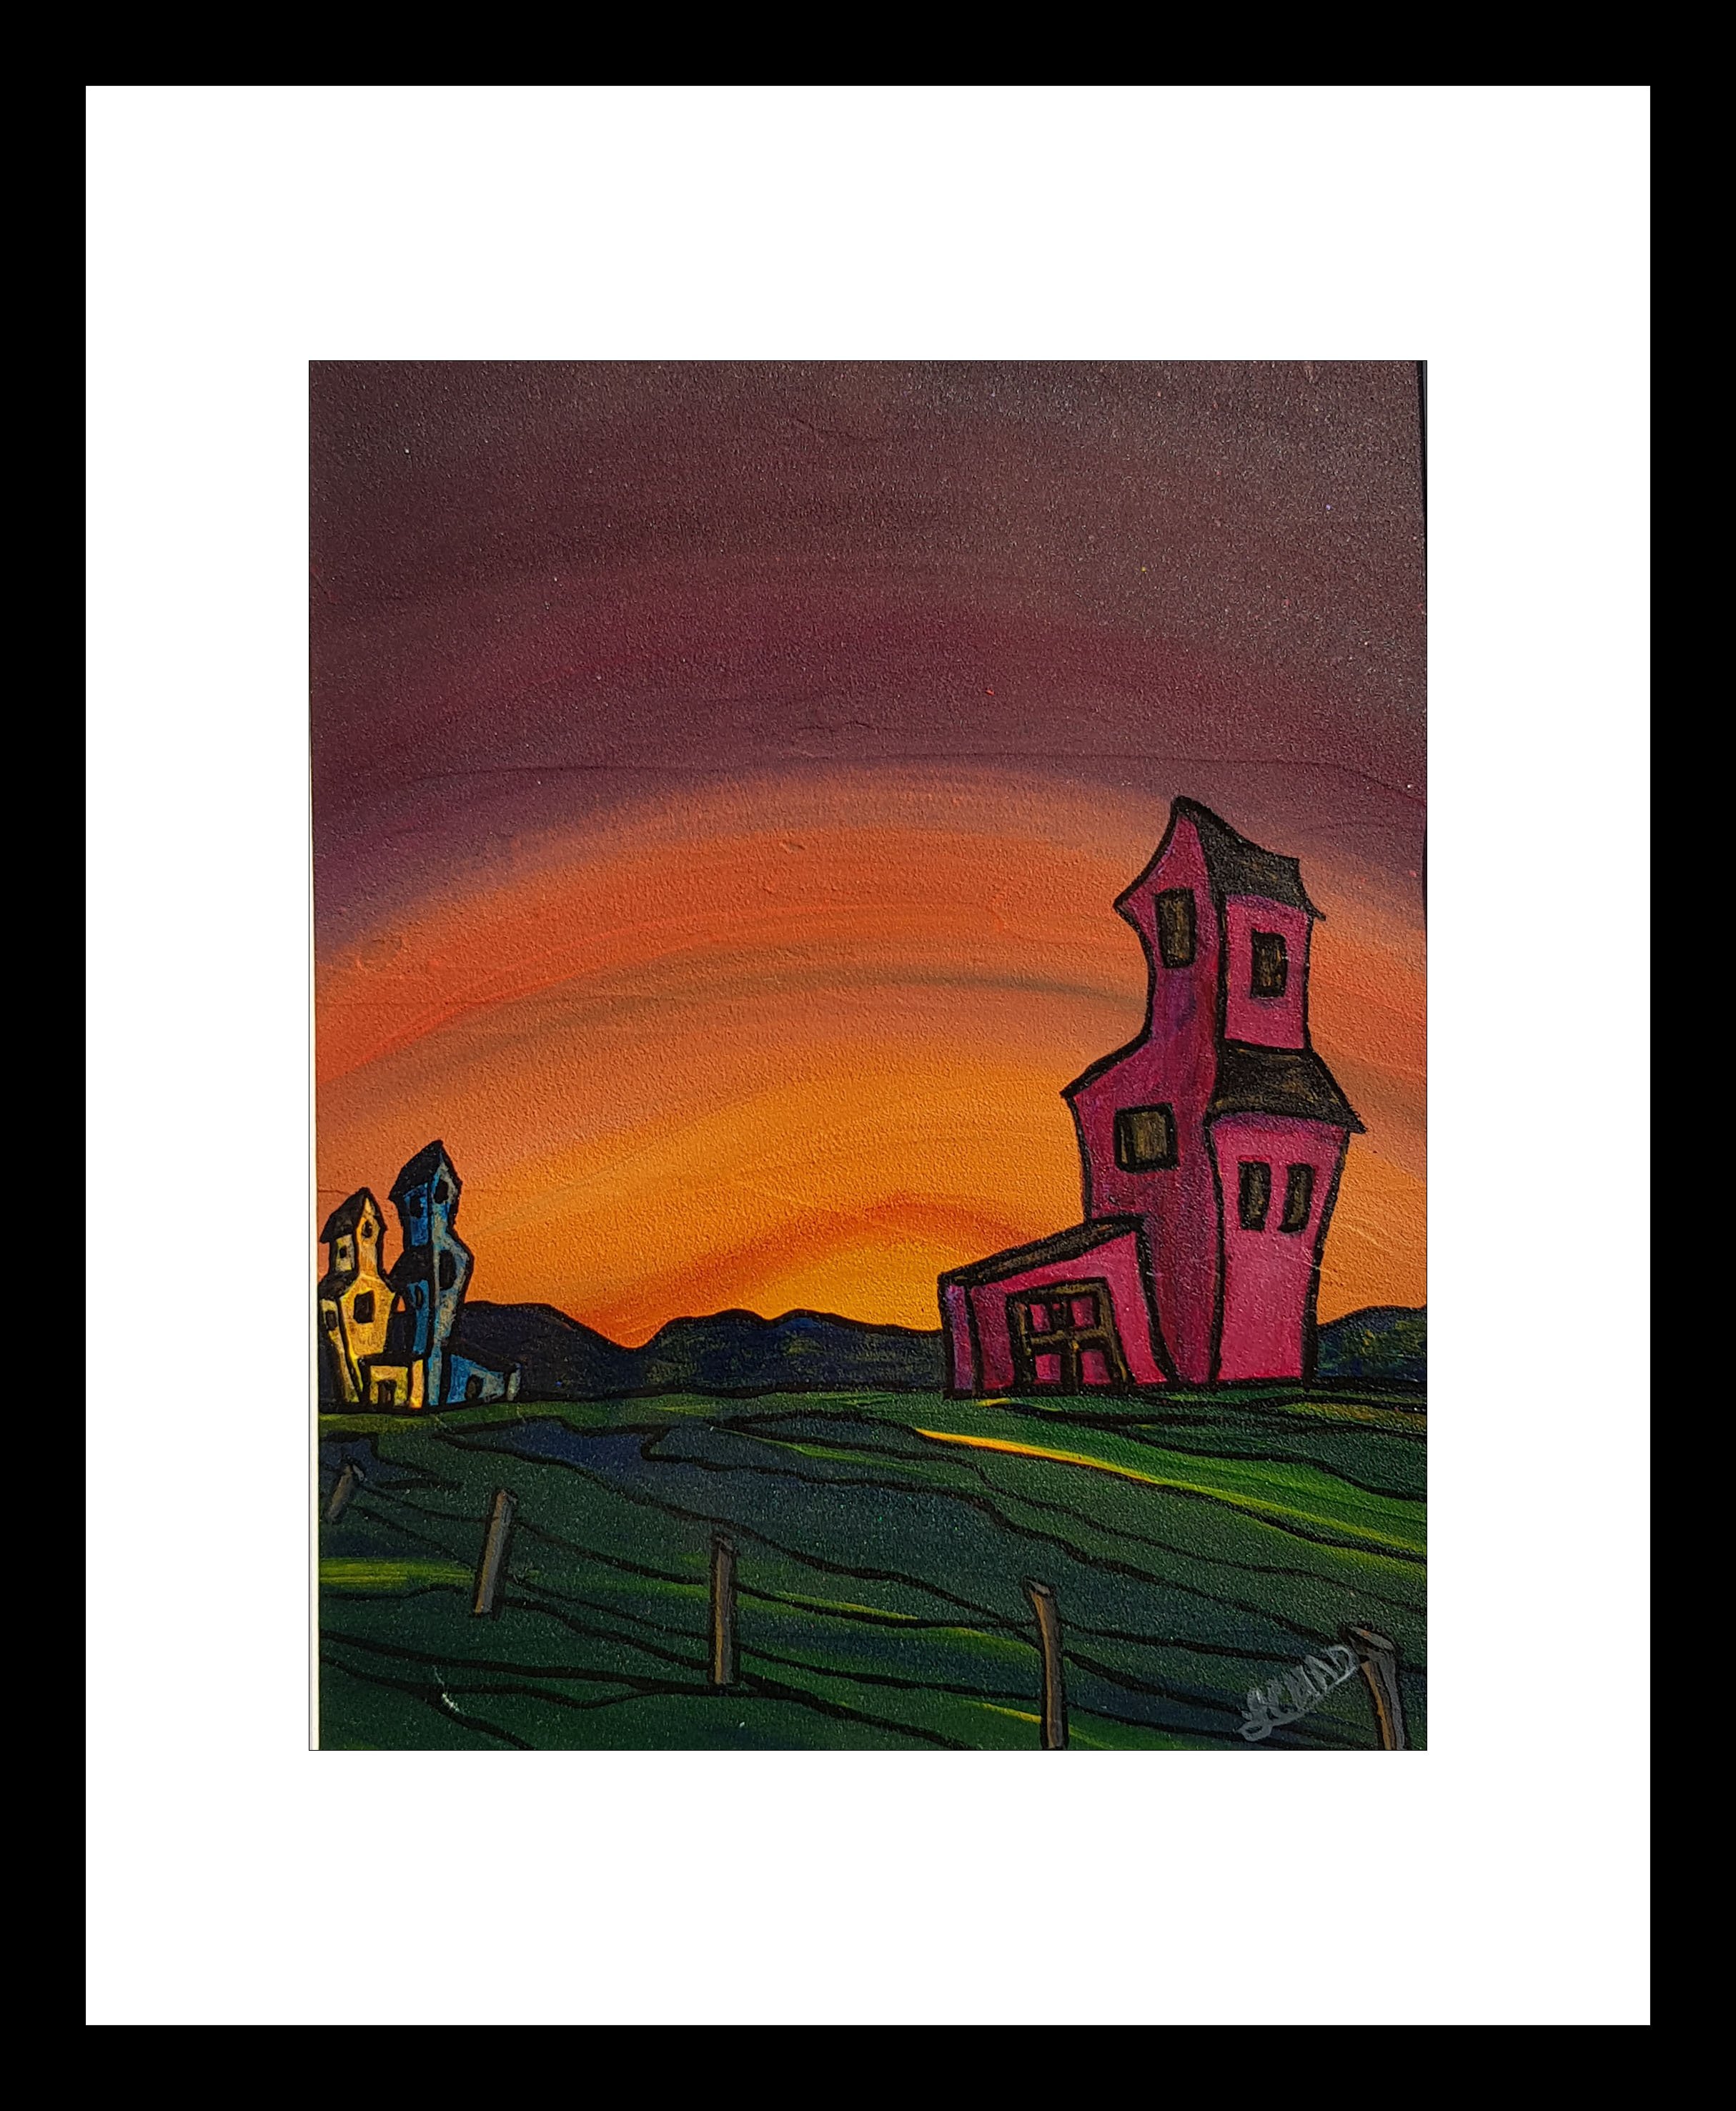 "As the Sun Goes Down" [2018]
Image: 5" x 7" Framed: 20" x 20"
Acrylic on micaceous iron oxide (246 lb paper)
SOLD